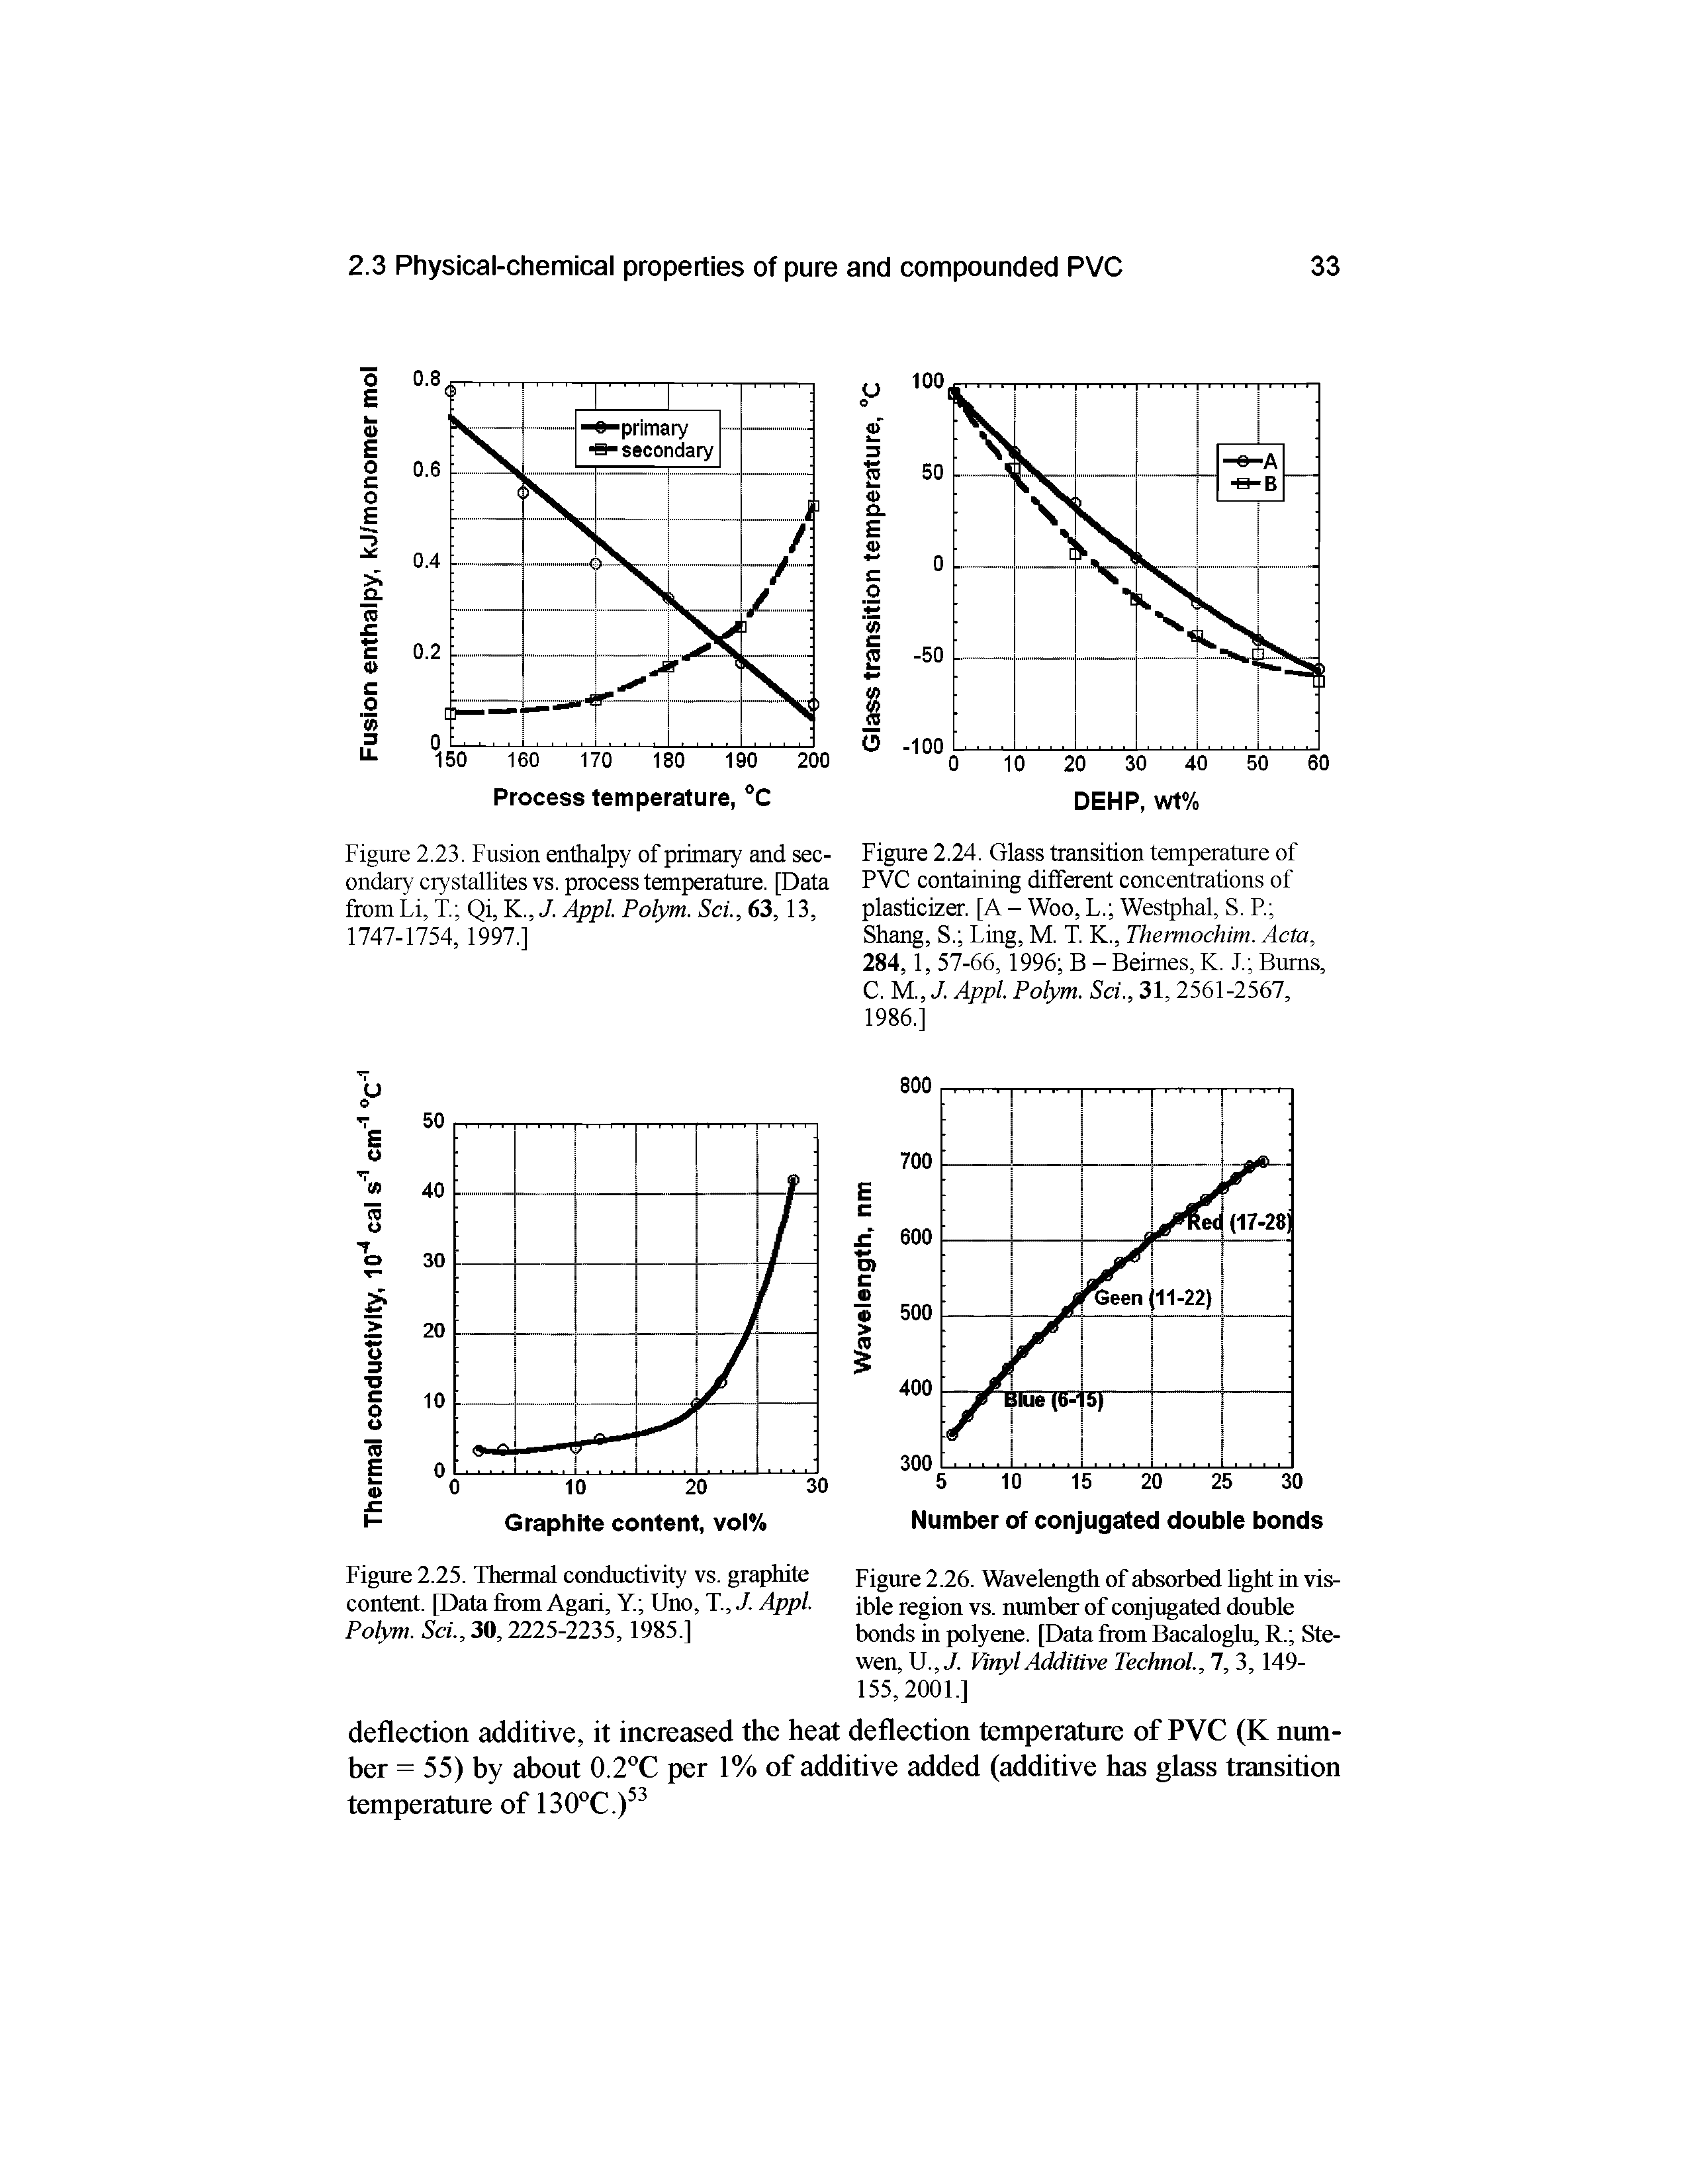 Figure 2.24. Glass transition temperature of PVC containing different concentrations of plasticizer. [A - Woo, L. Westphal, S. R Shang, S. Ling, M. T. K., Thermochim. Acta, 284, 57-66,1996 B - Beimes, K. I Bums,...